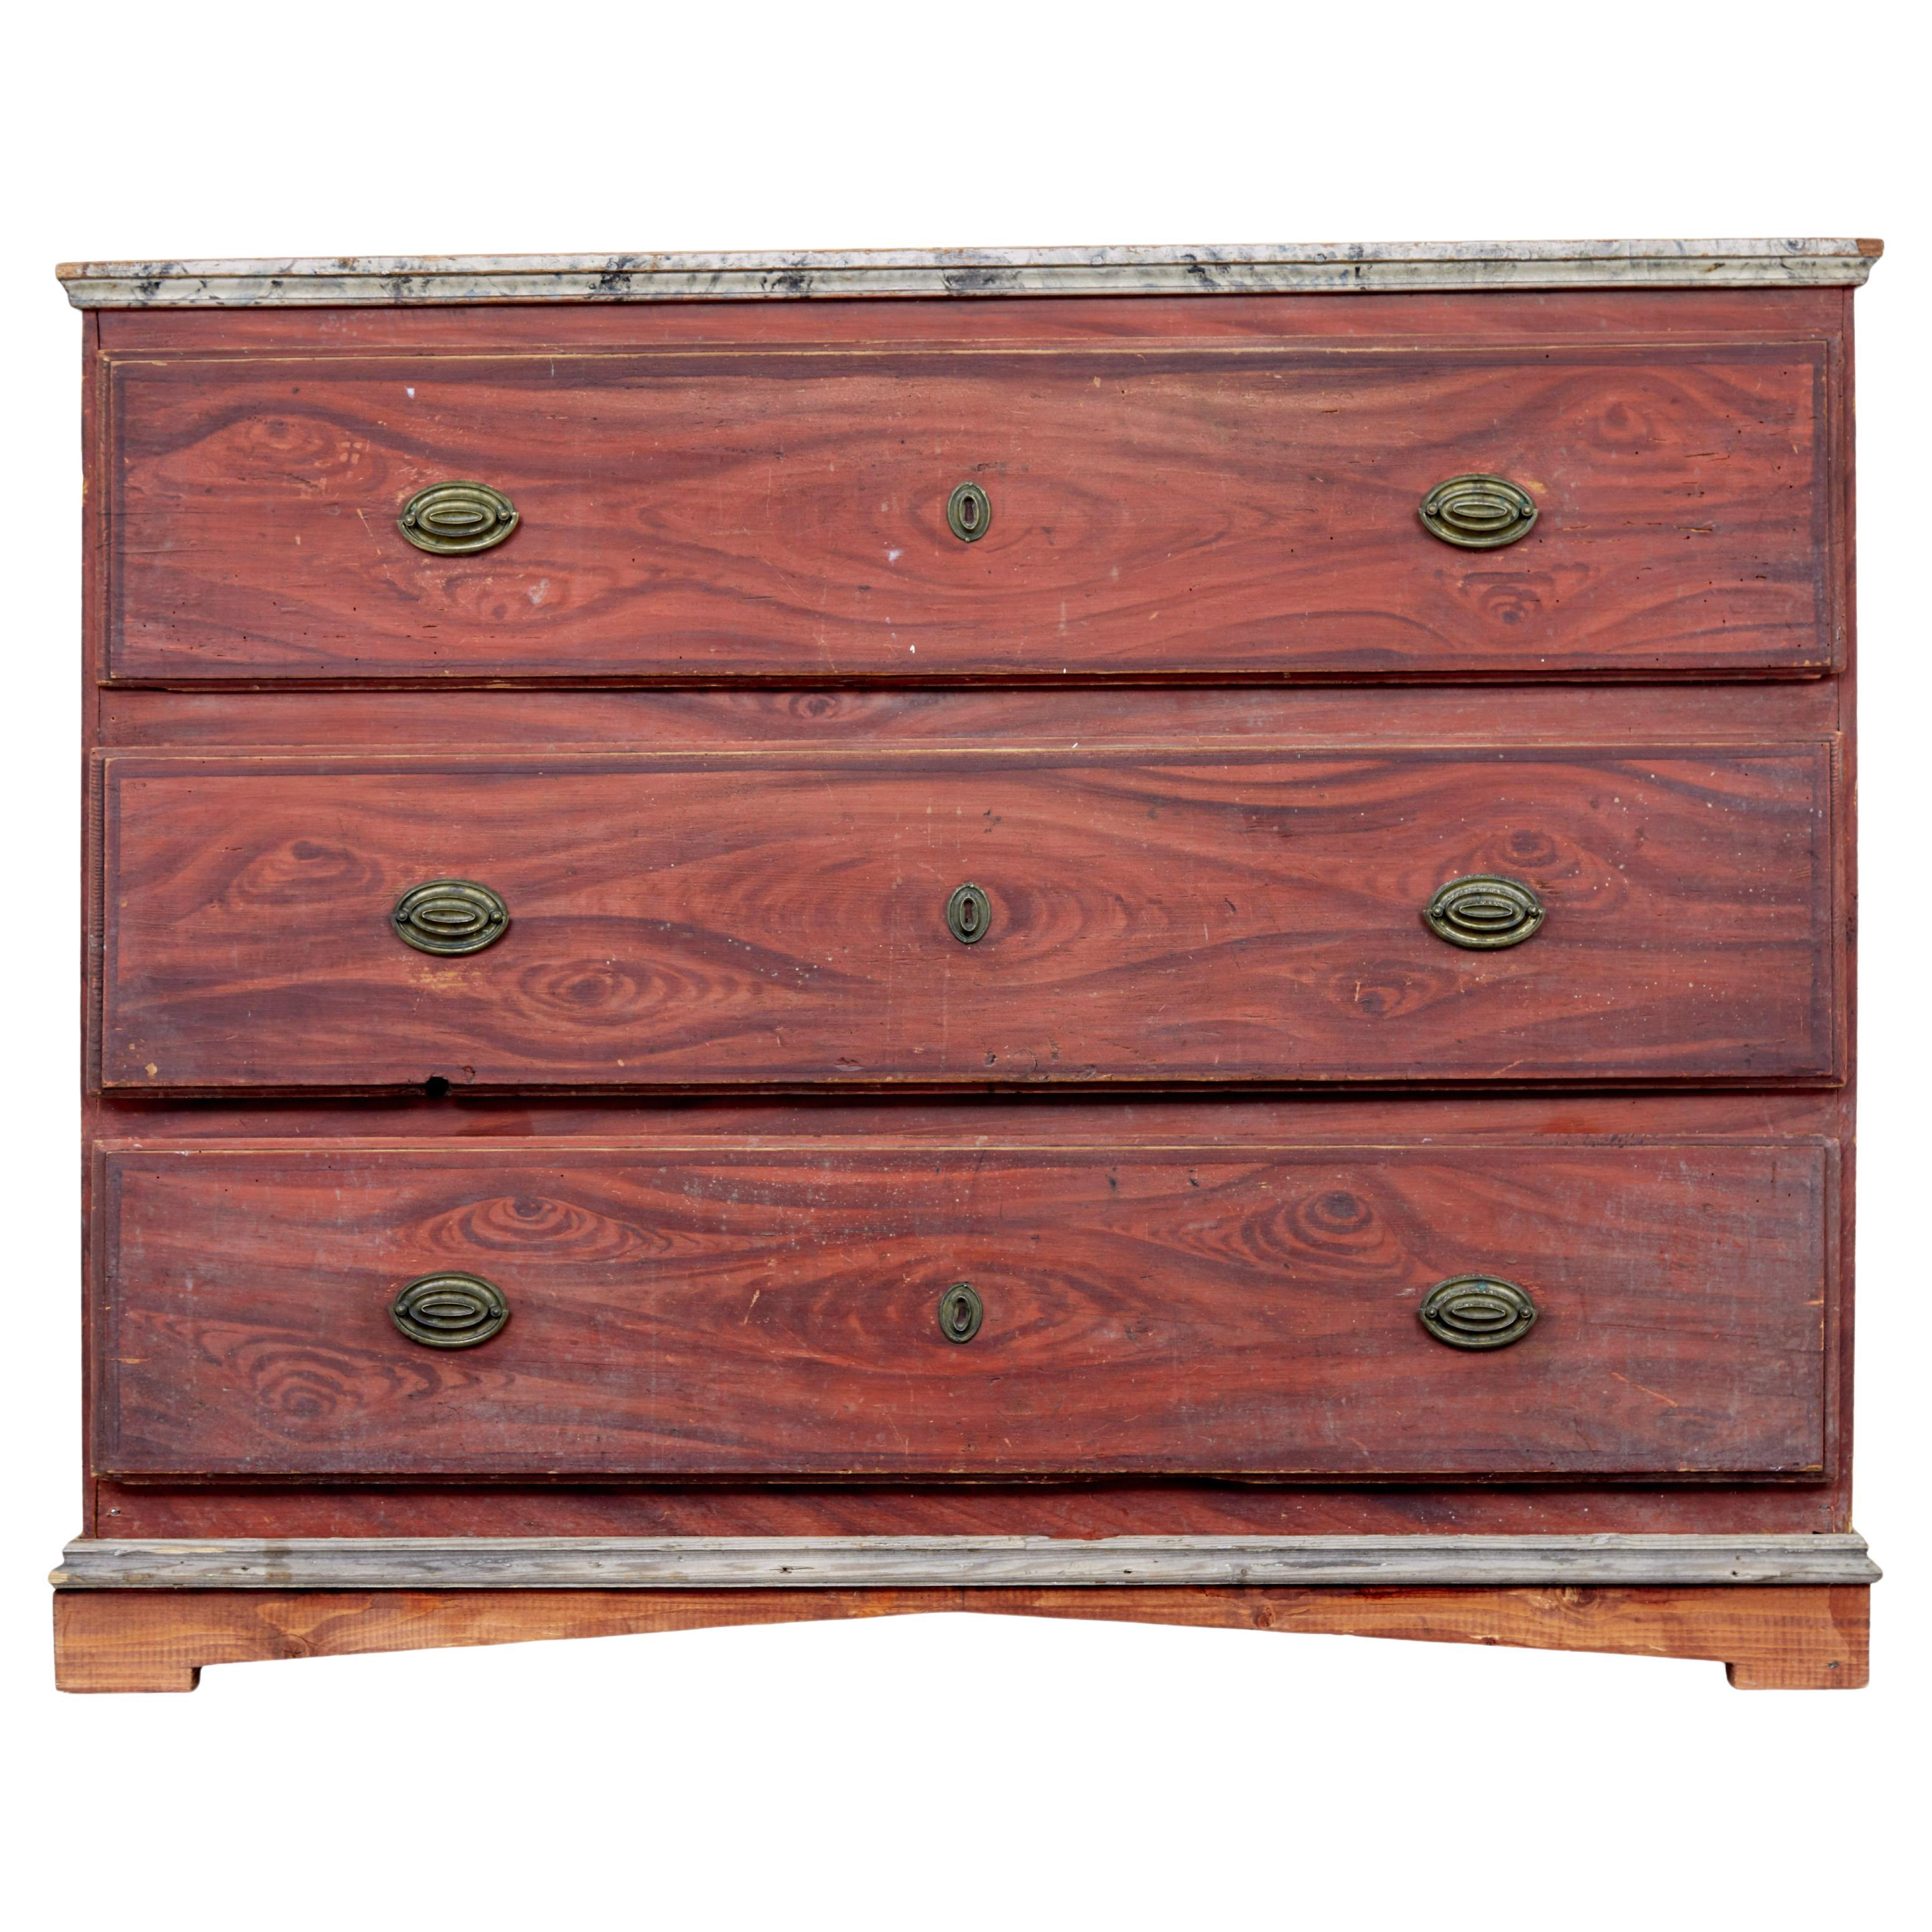 19th century hand painted Swedish chest of drawers